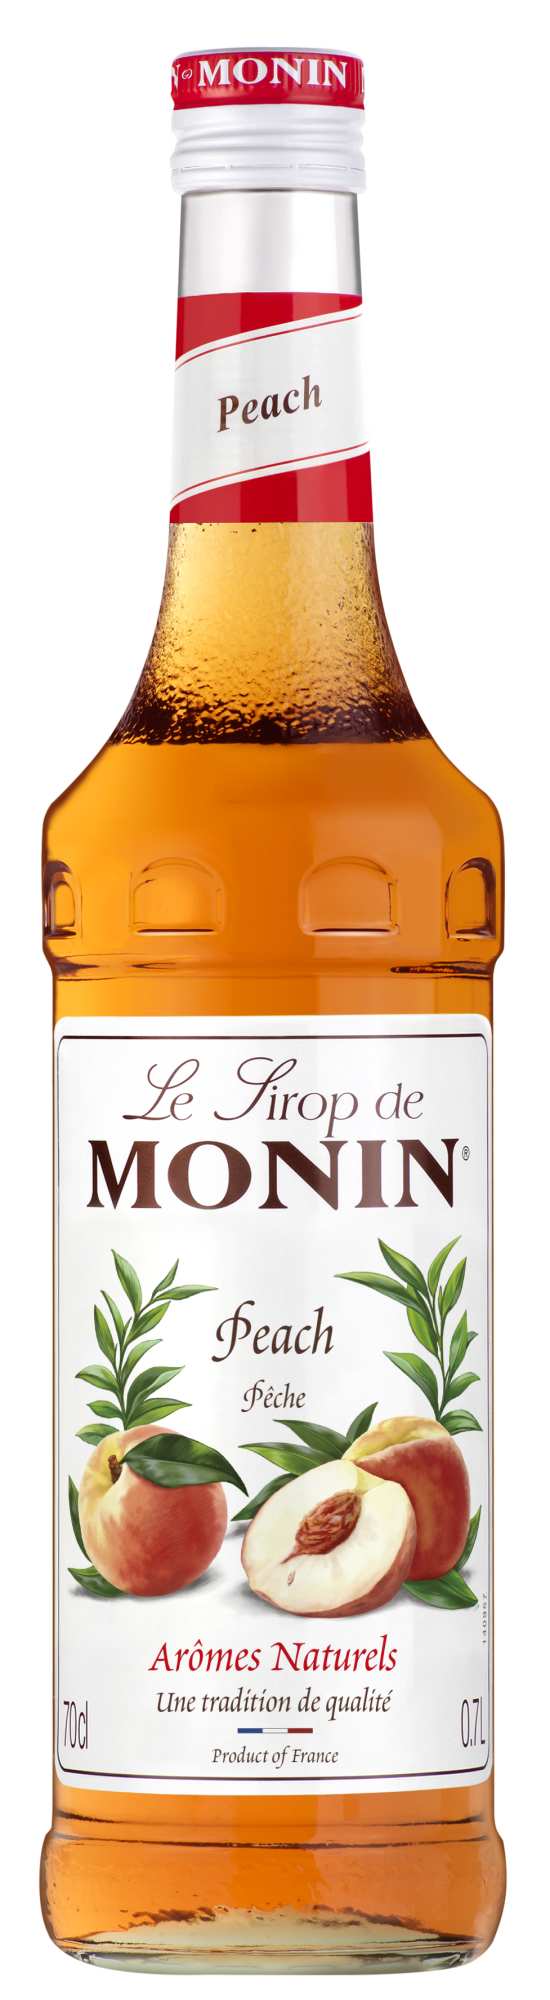 Buy MONIN Peach Syrup. It captures the sweet, juicy taste and aroma from eating fresh peaches. 